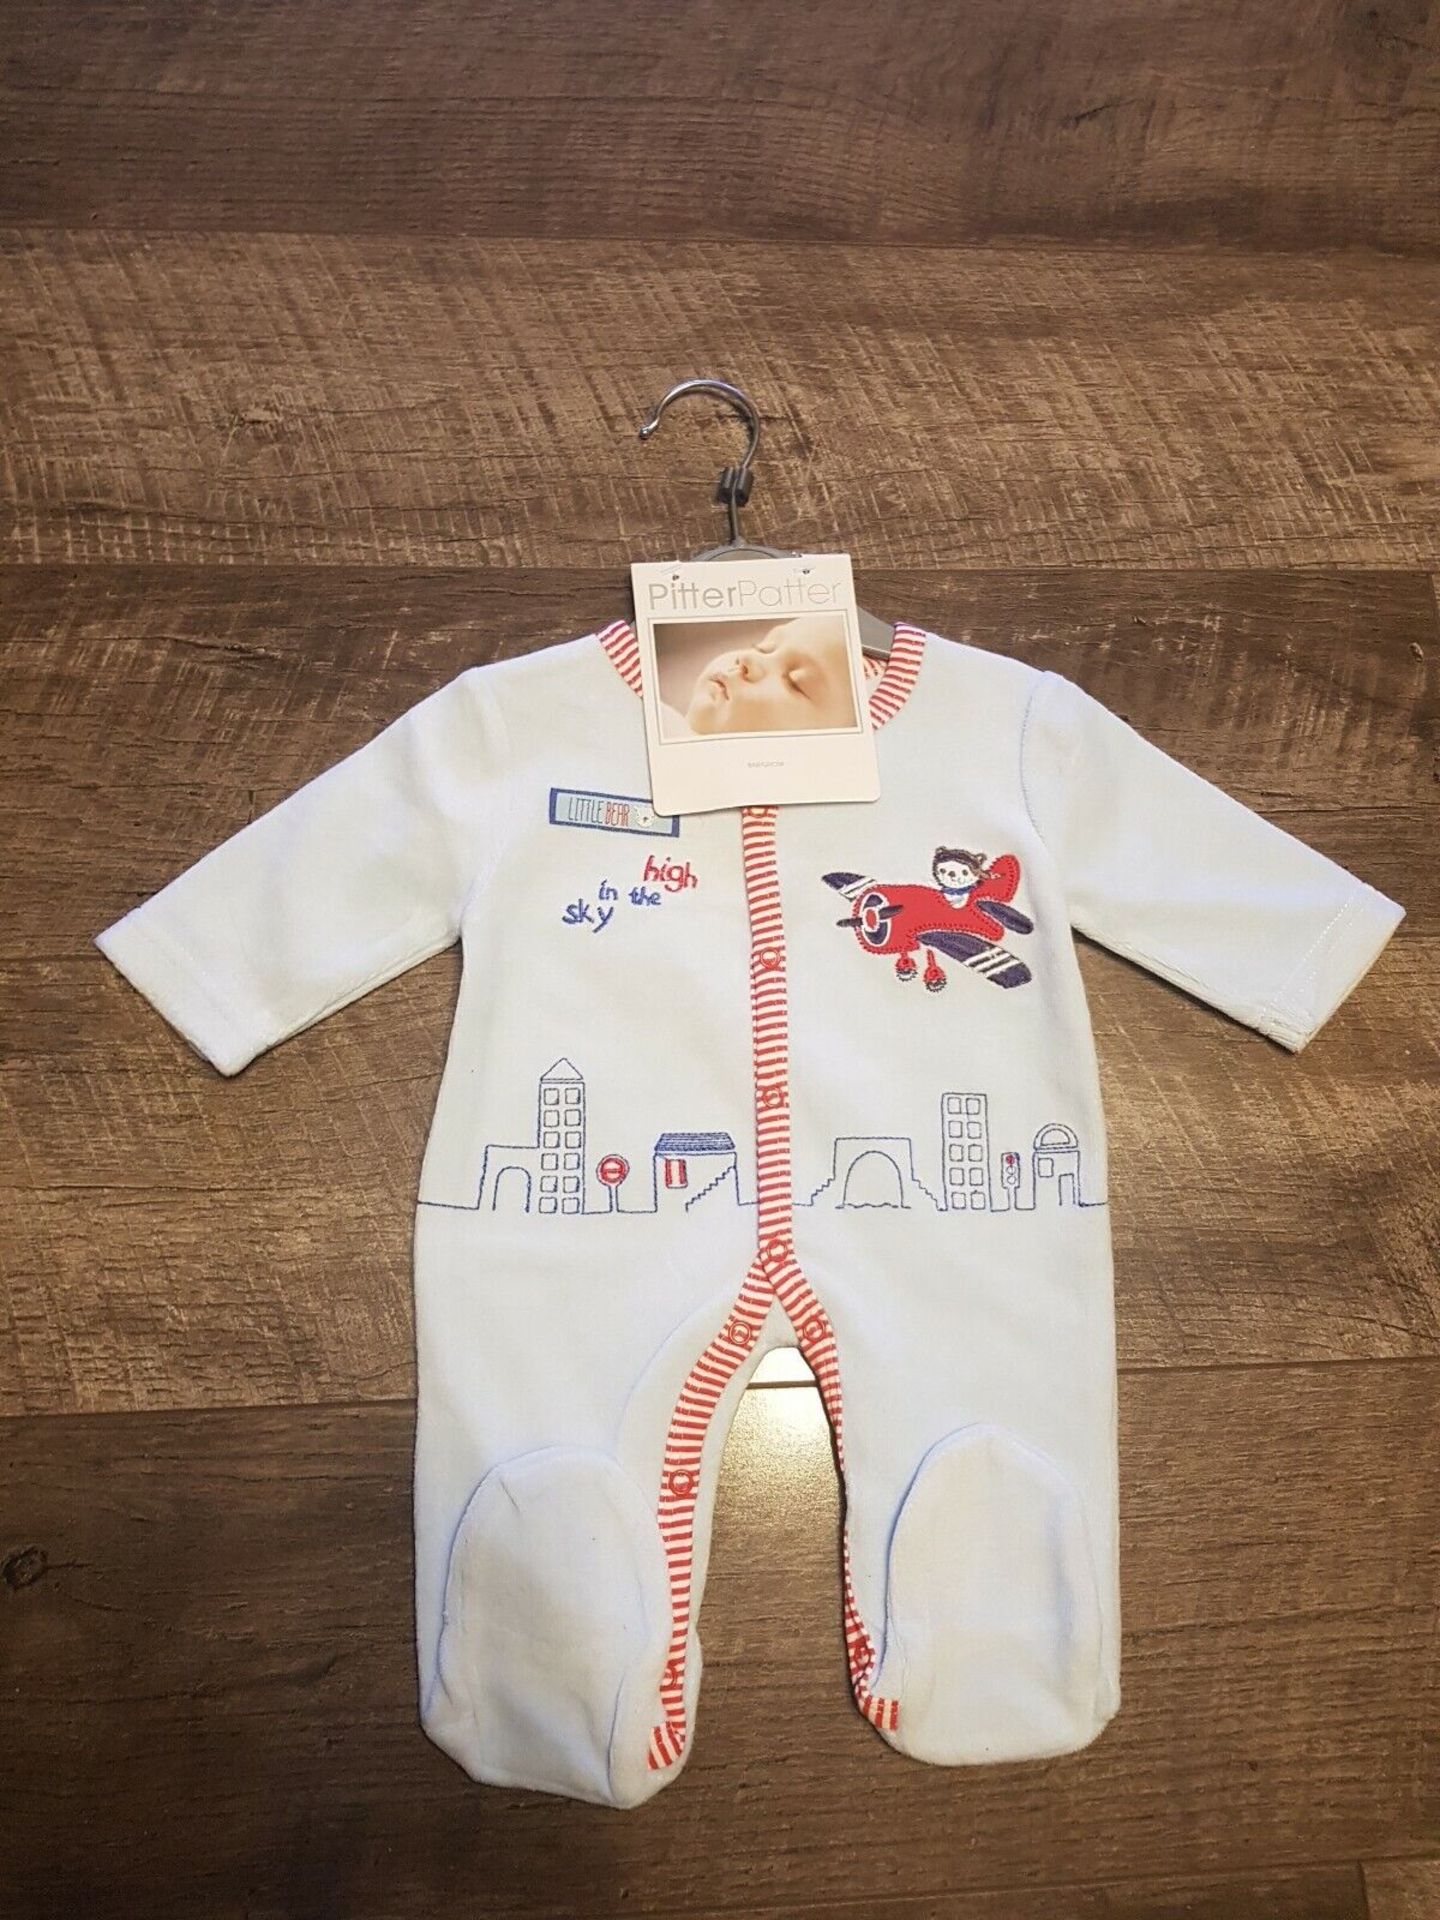 4x PitterPatter Babygrows - Image 3 of 3